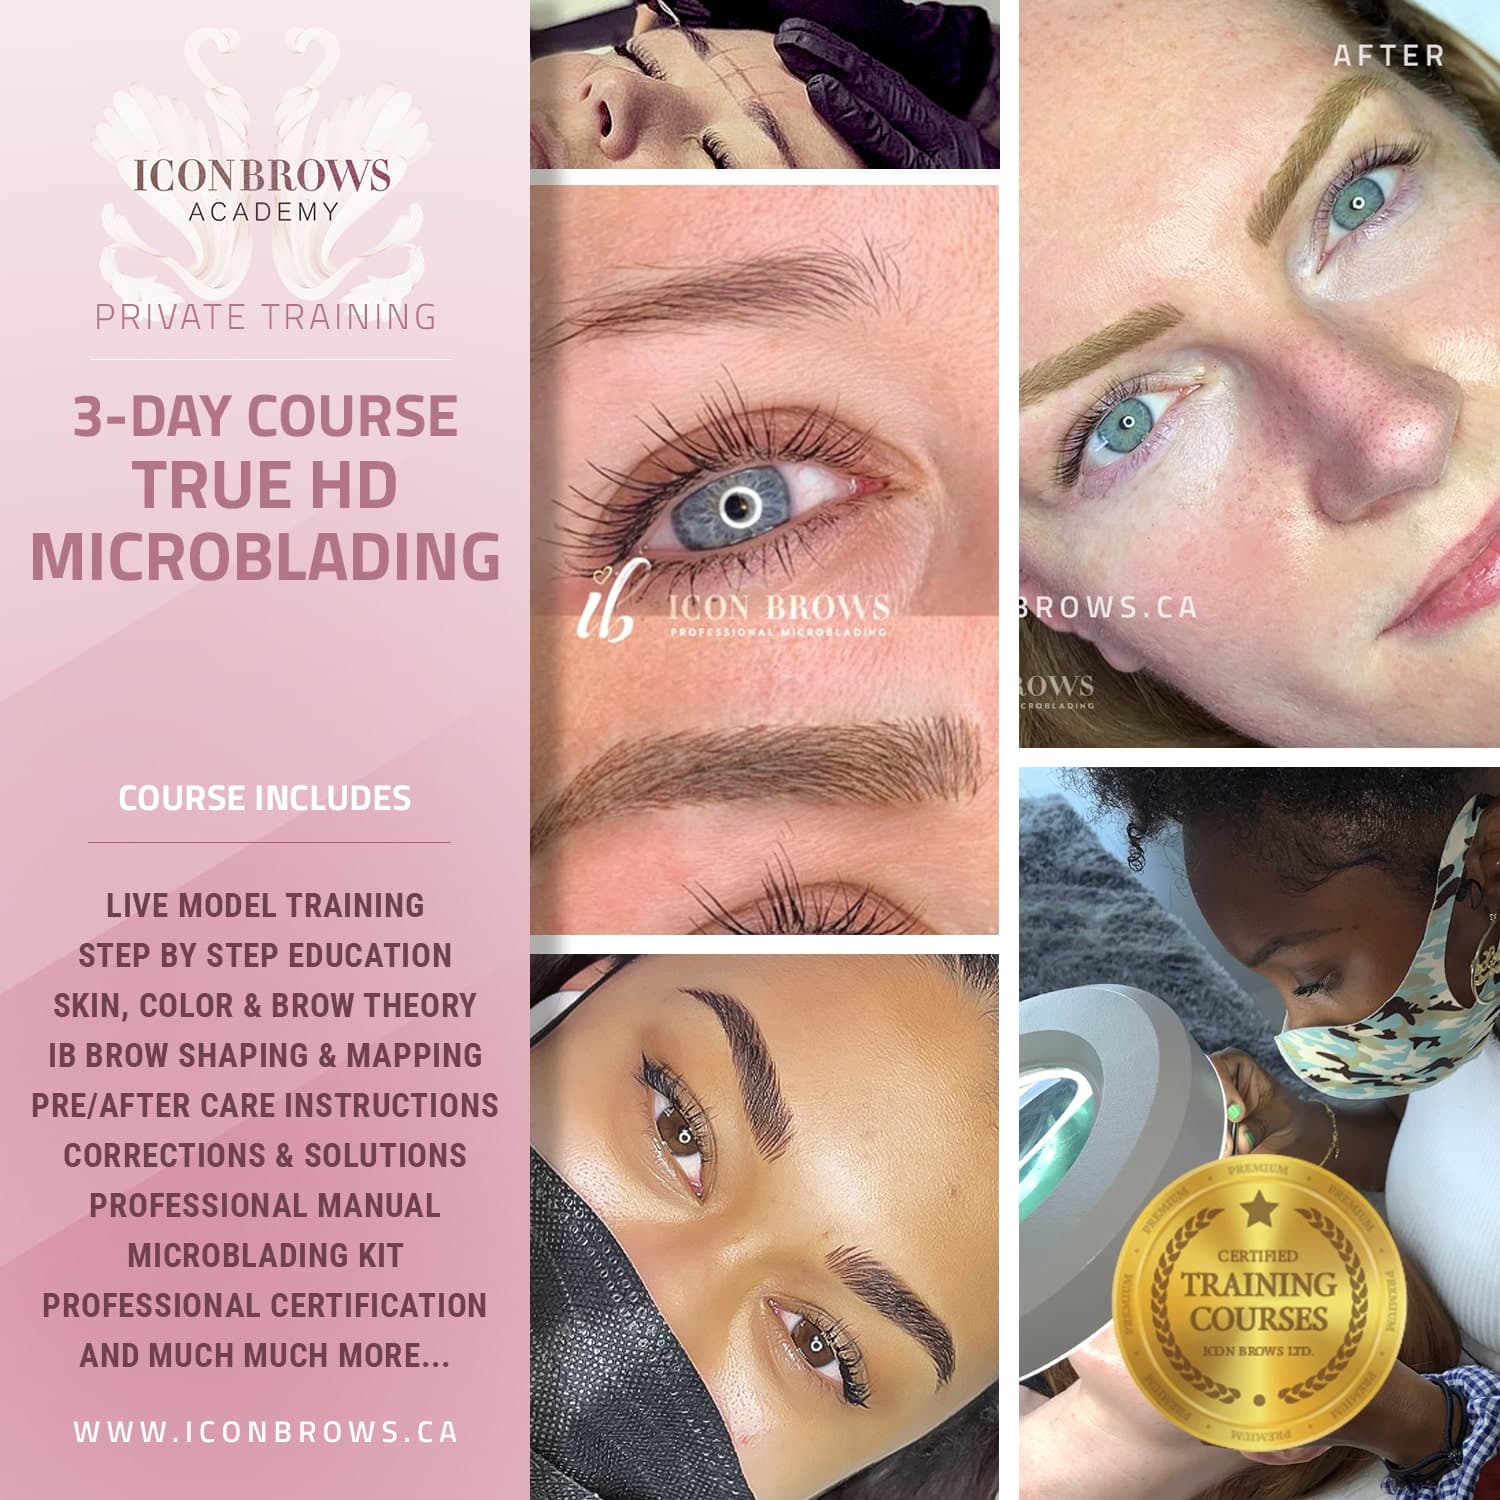 Microblading training course in Toronto.